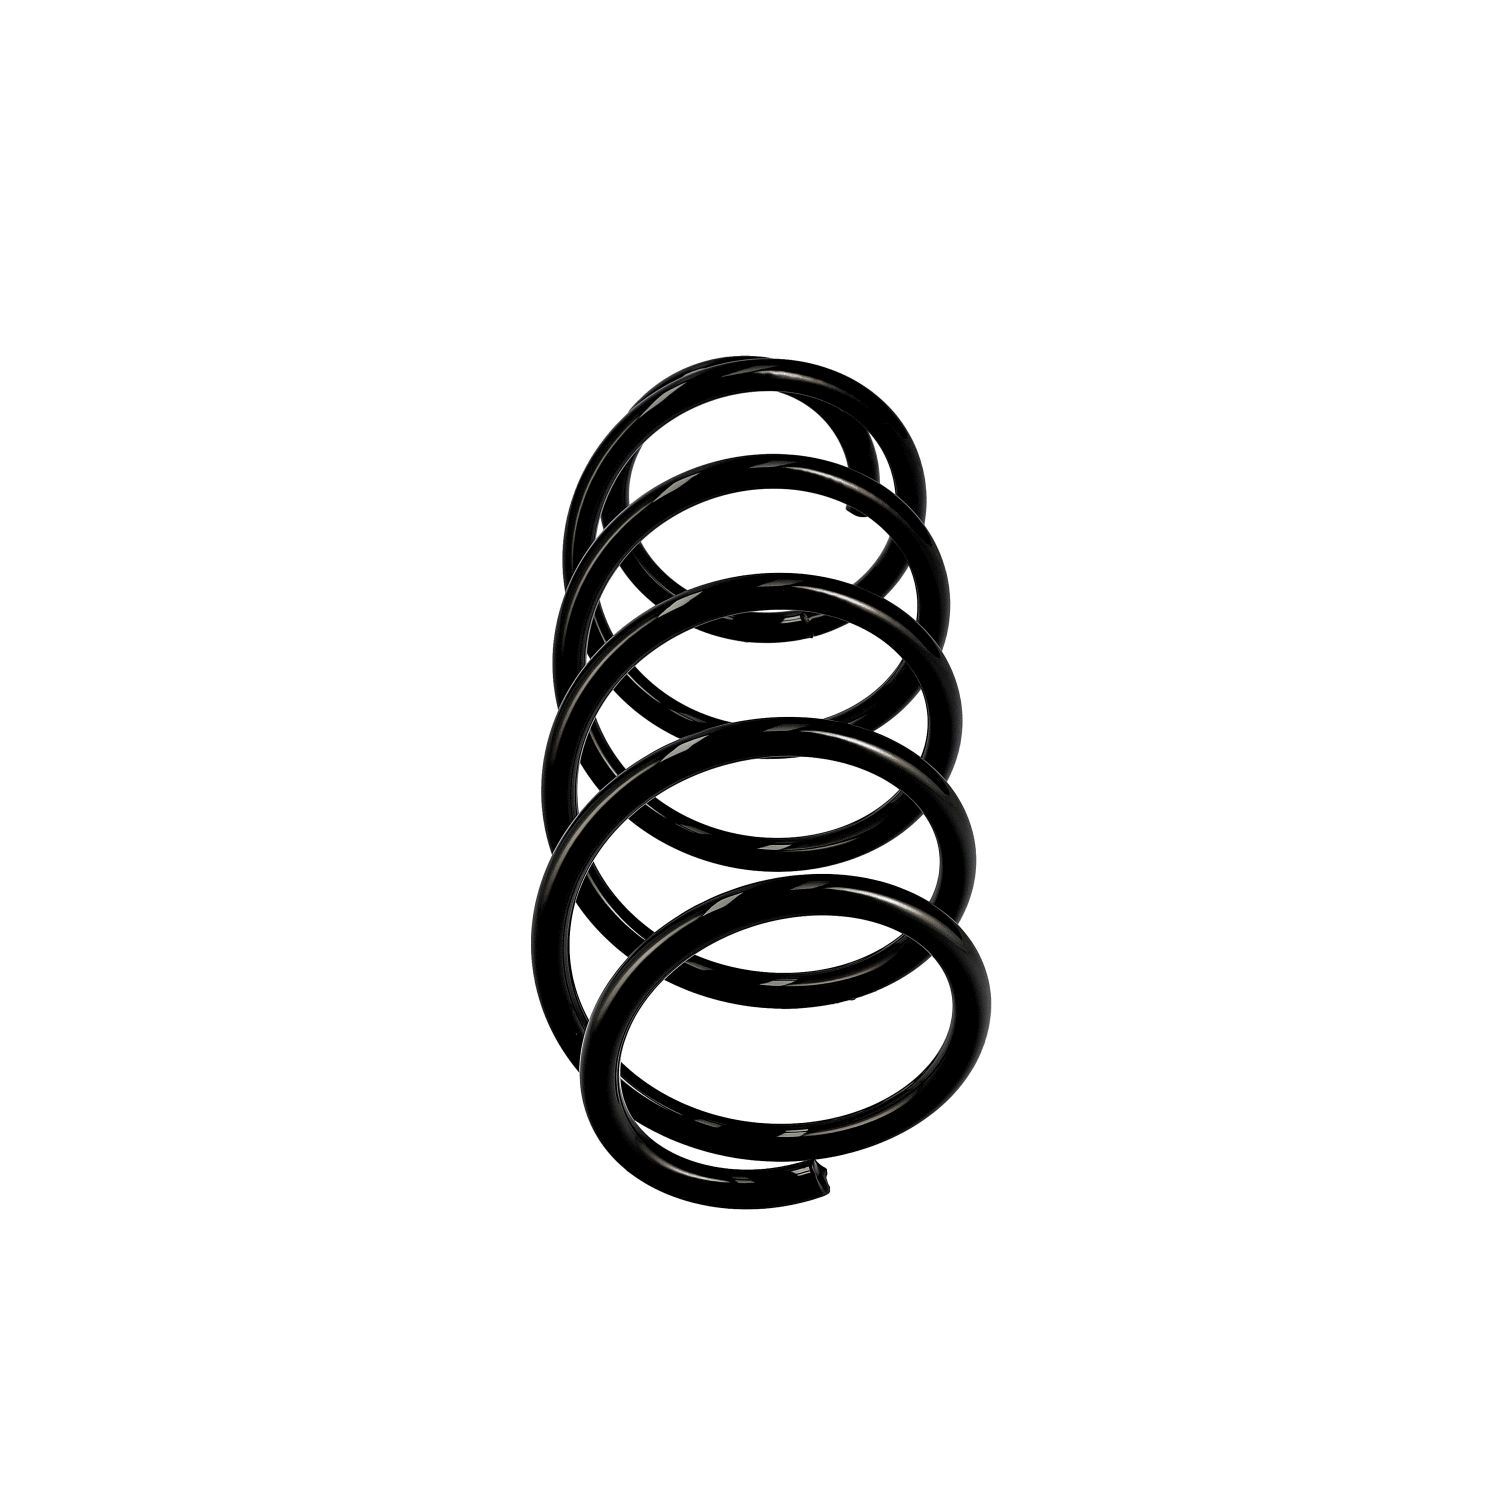 EIBACH Single Spring ERL (OE-Replacement) R10156 Coil spring 6Q0 411105 BN